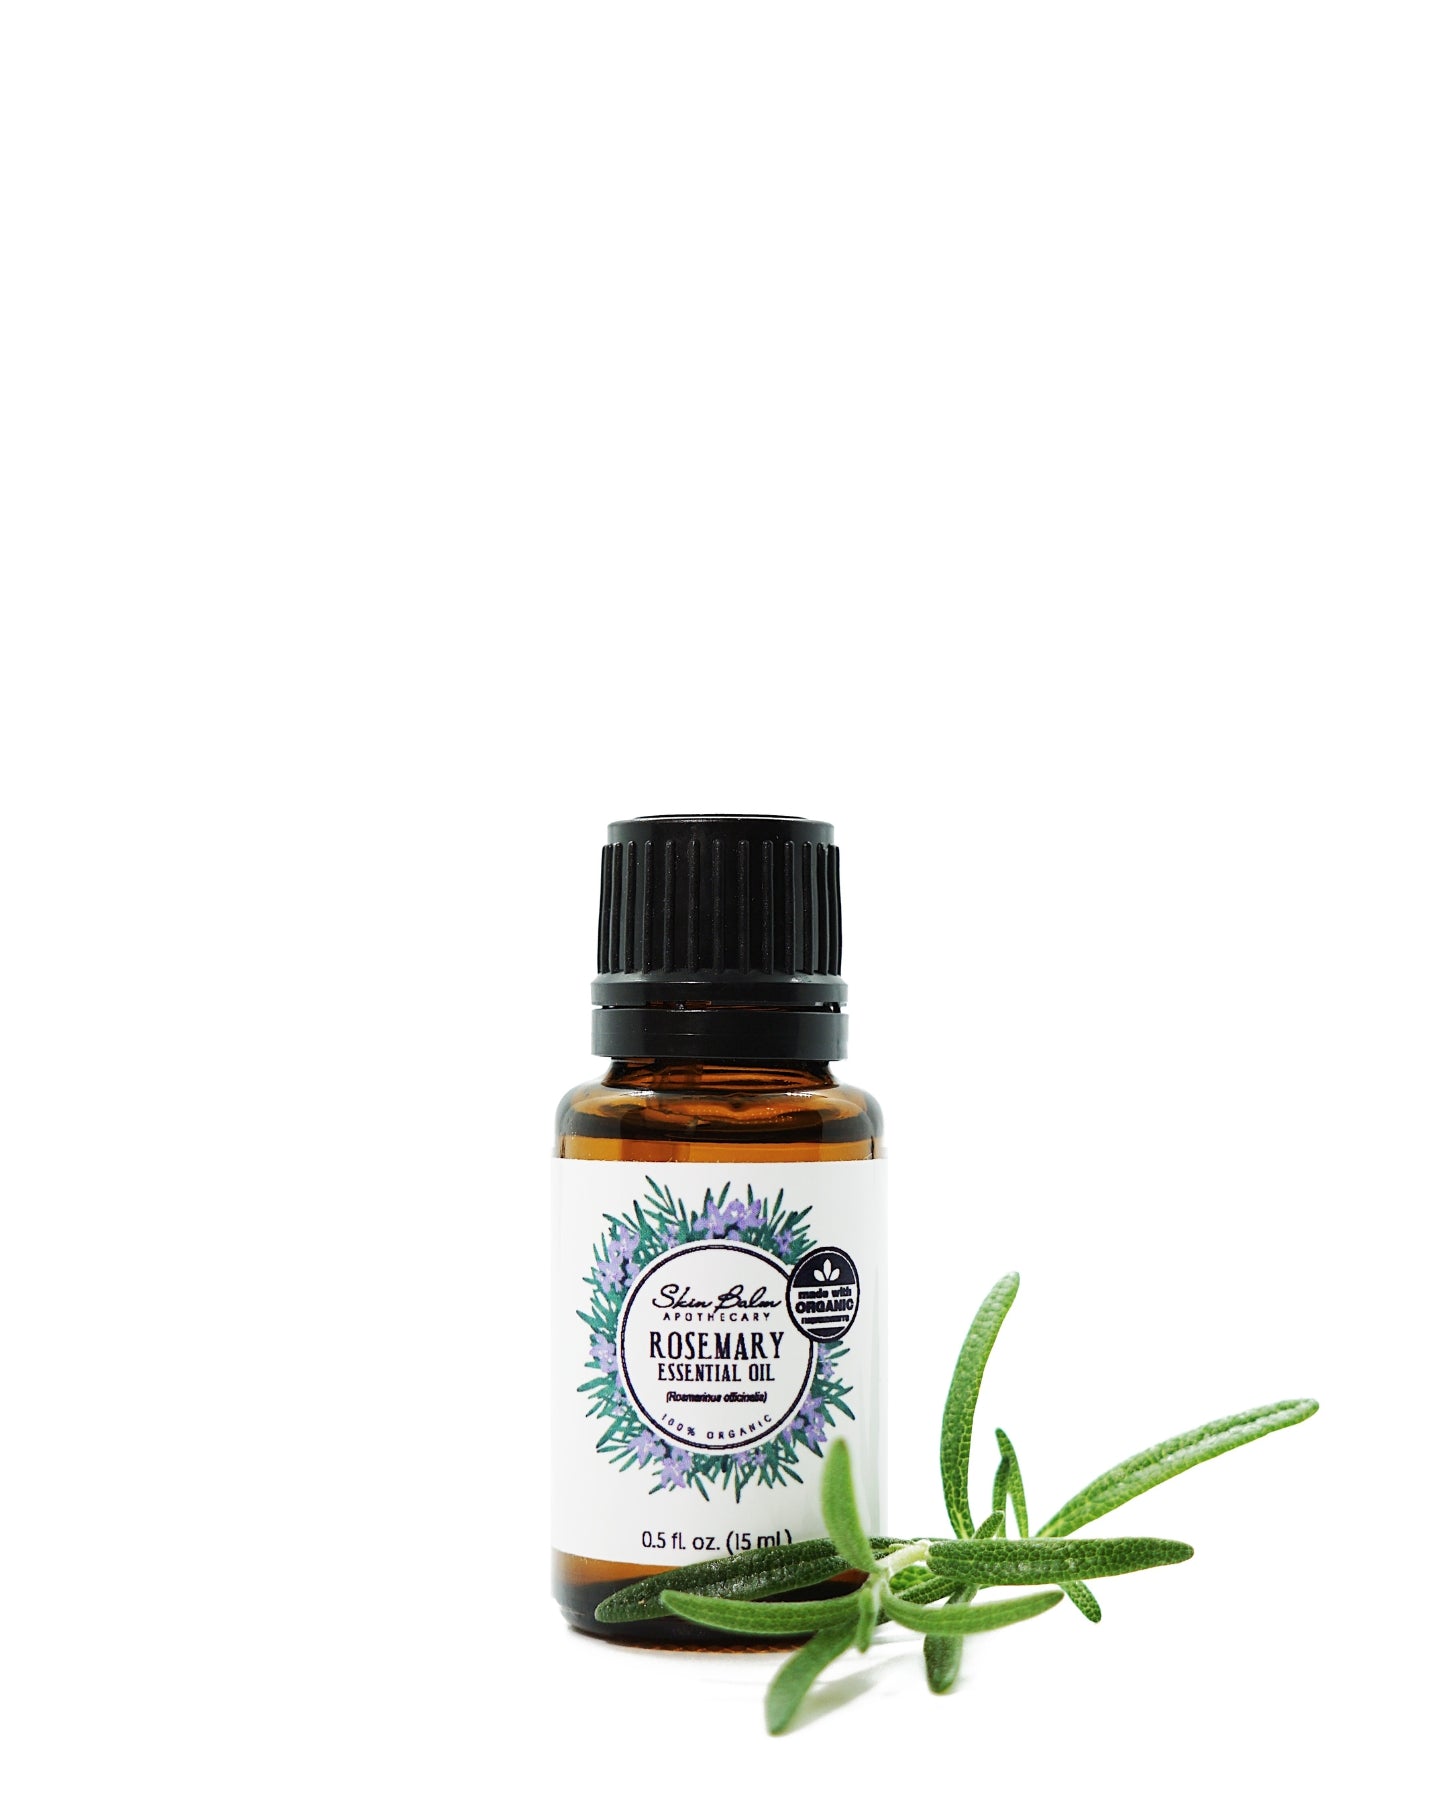 Organic Rosemary Essential Oil with a rosemary stem against a white background.